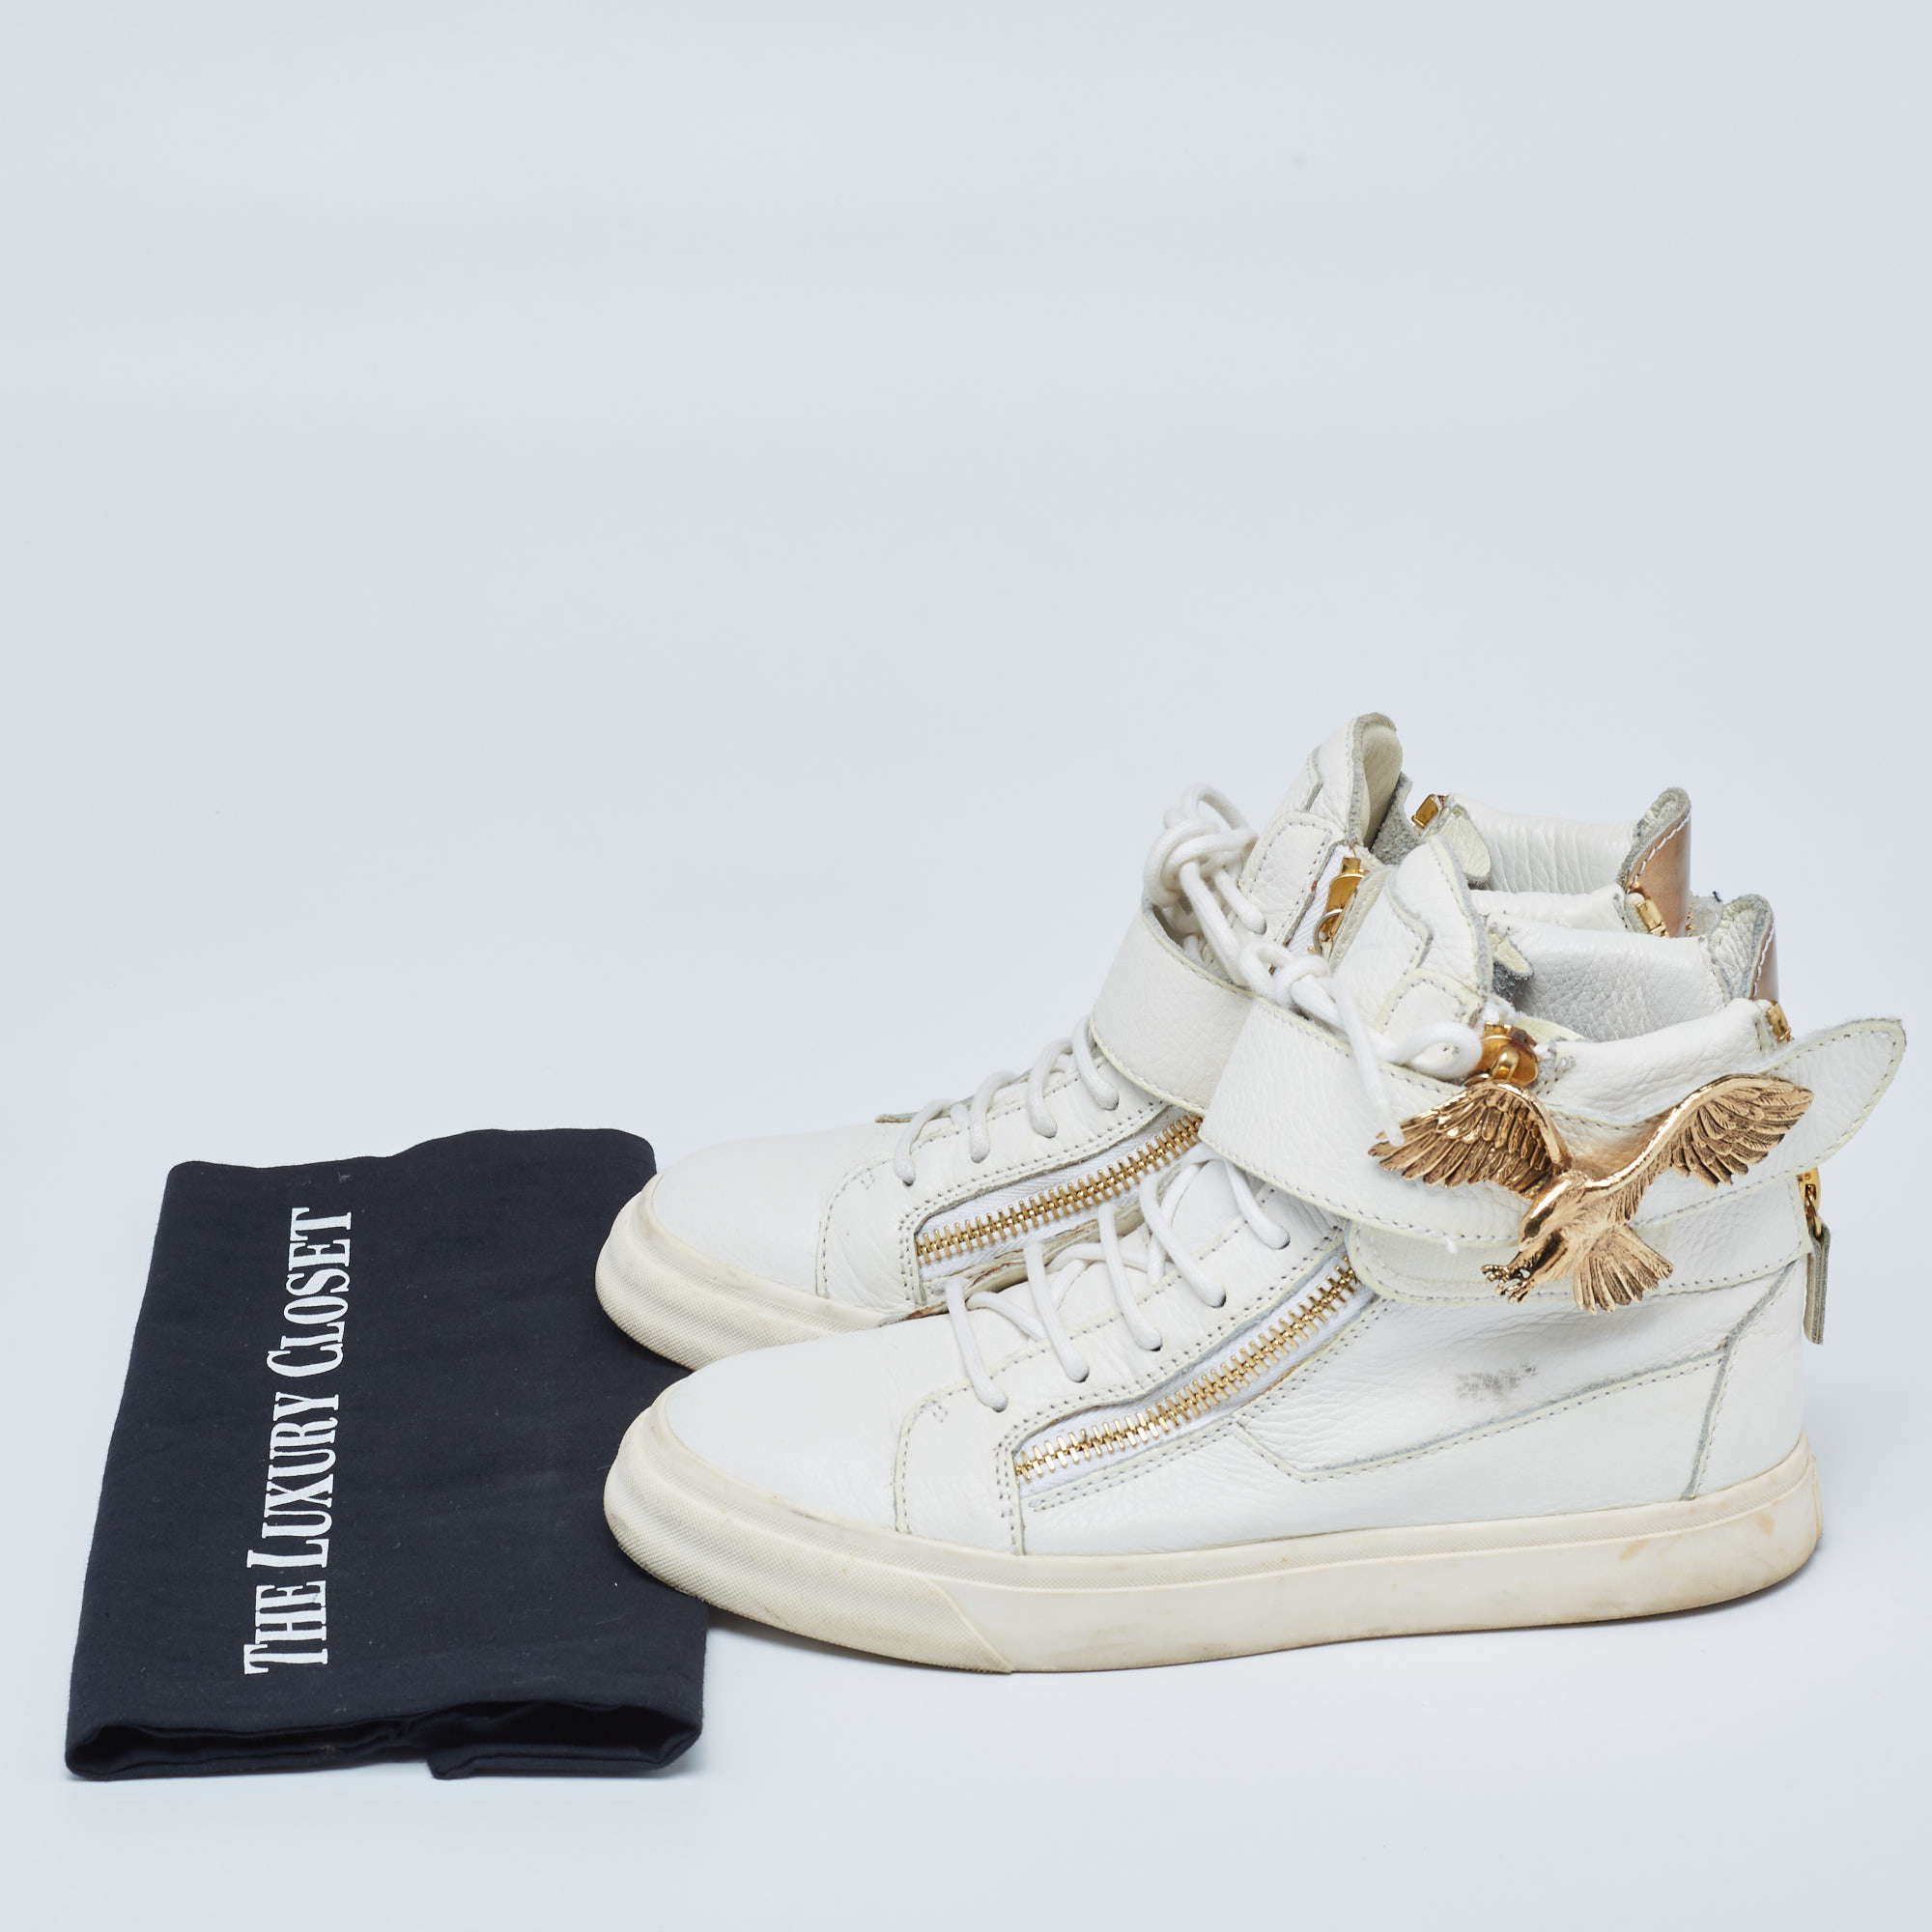 Giuseppe Zanotti White Leather Embellished High Top Sneakers Size 38.5